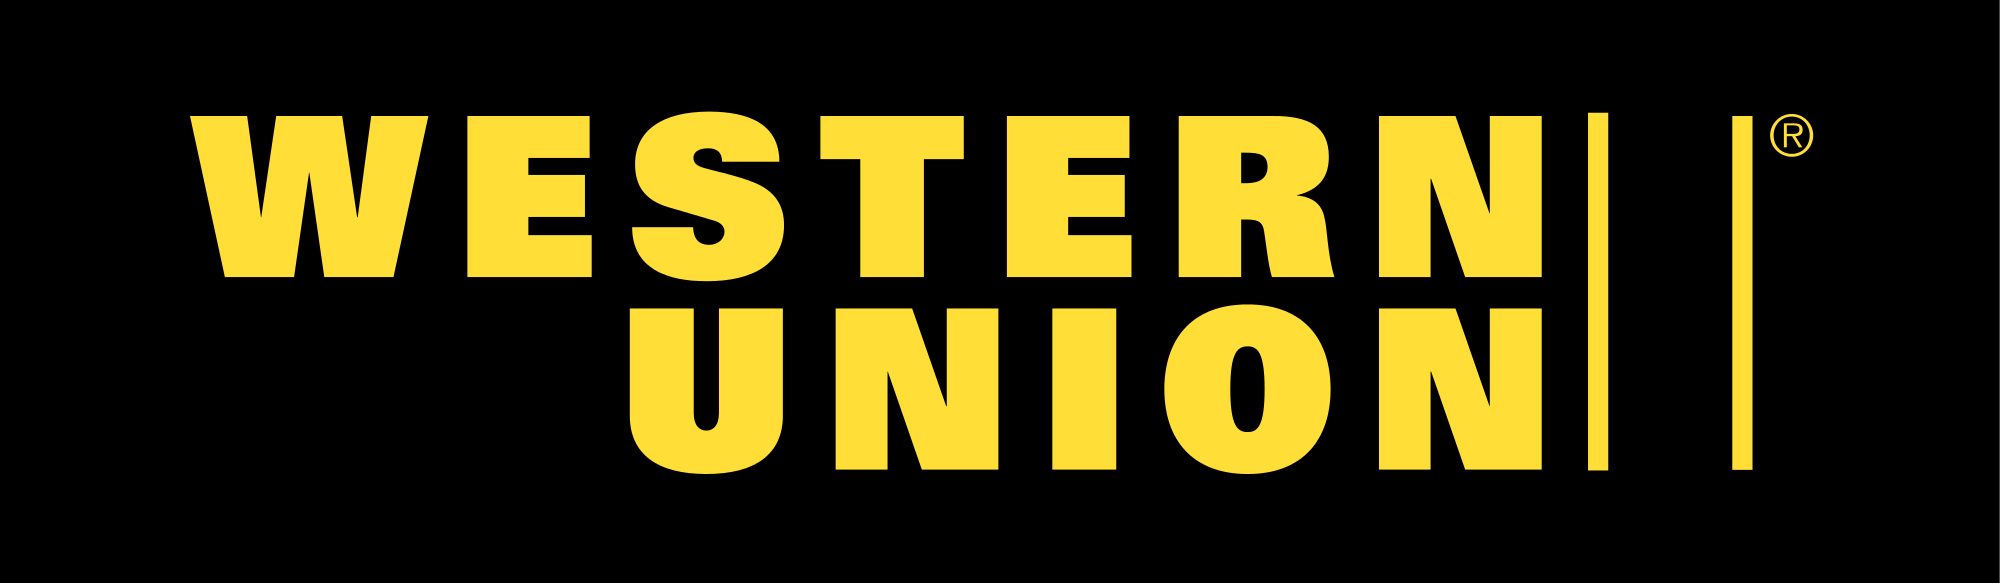 Open Hdpng.com  - Western Union, Transparent background PNG HD thumbnail